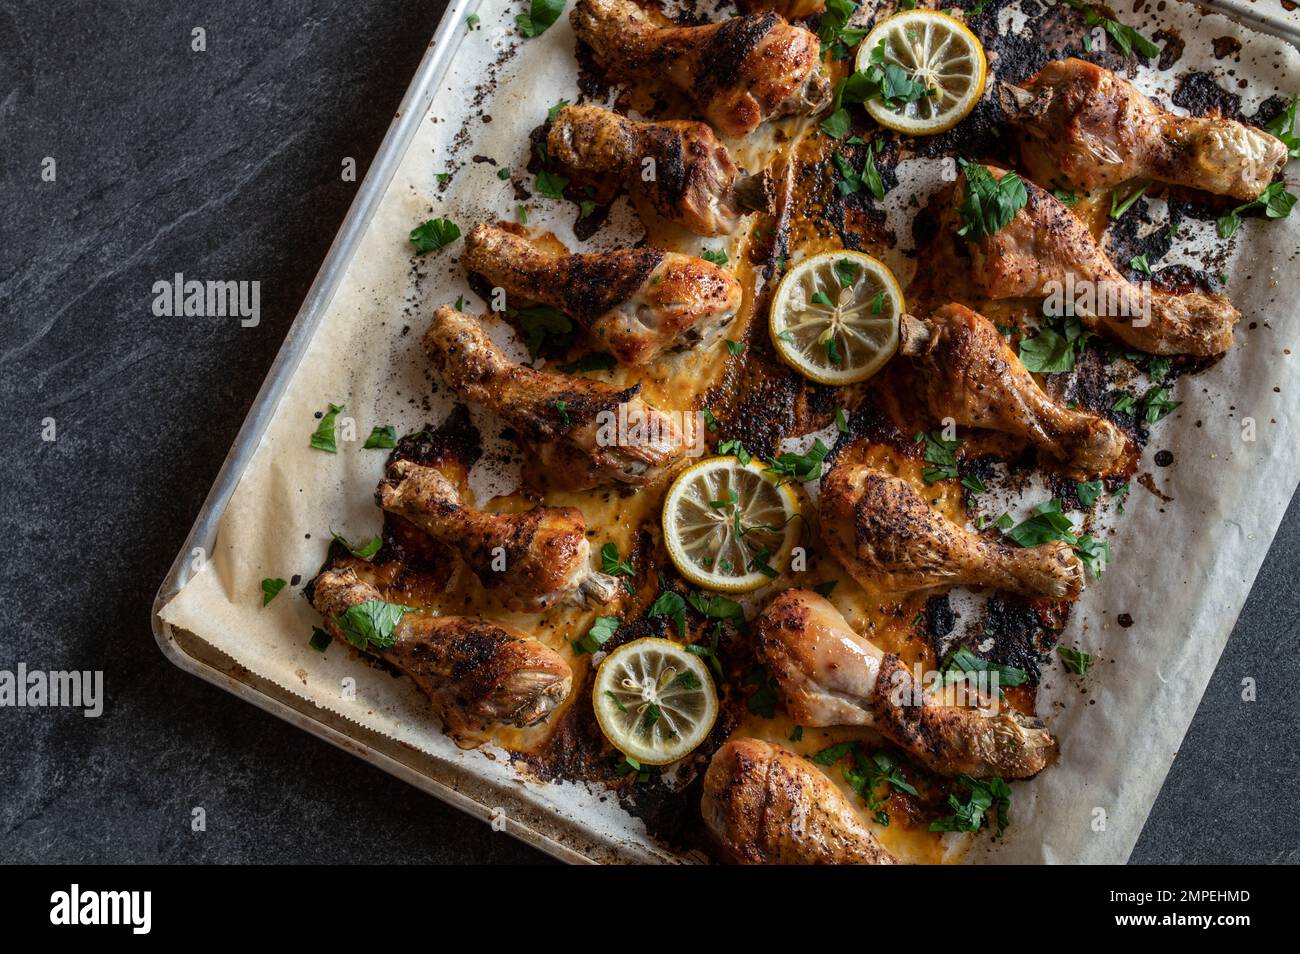 Oven baked chicken drumsticks on a baking tray isolated on dark background. Flat lay Stock Photo